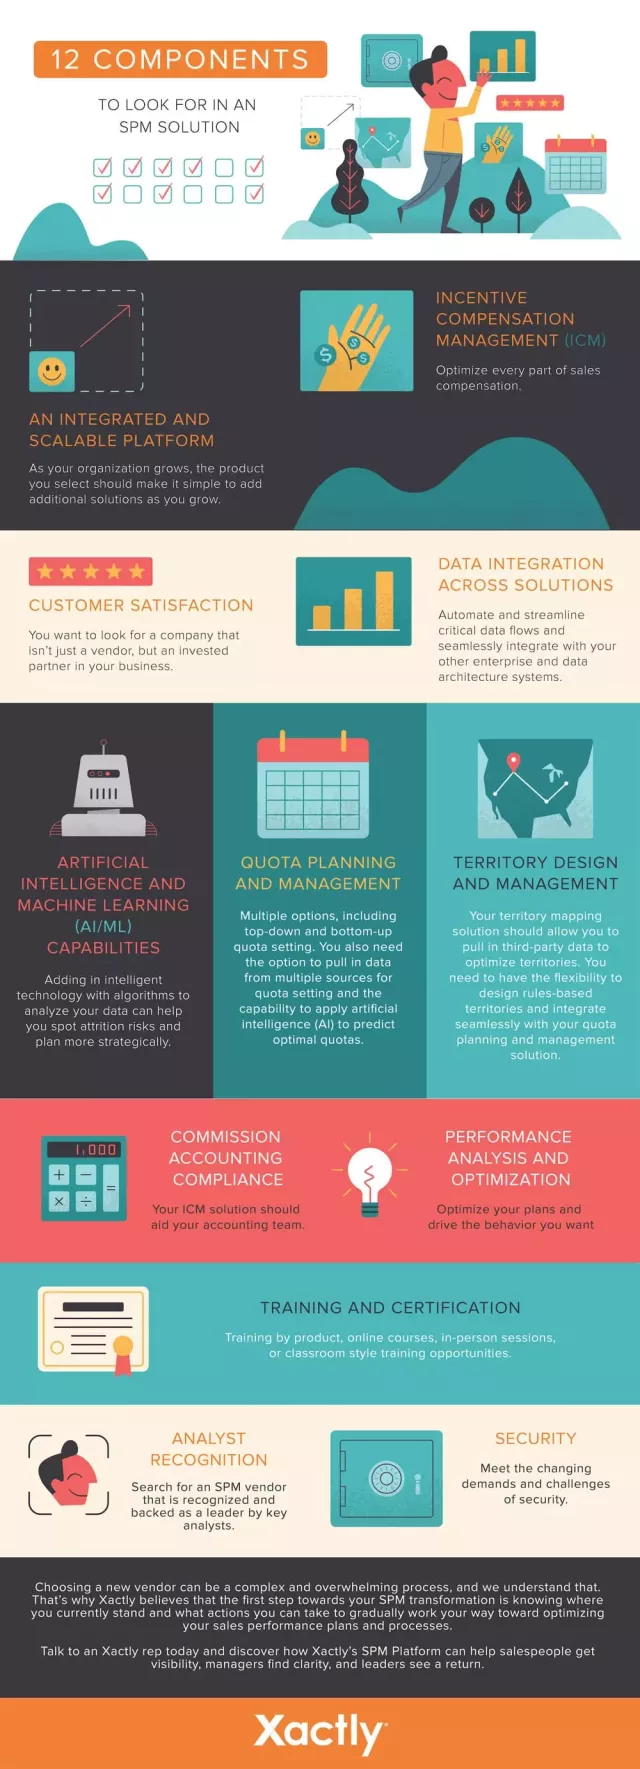 Checklist: 12 Components to Look for in an SPM Solution Infographic